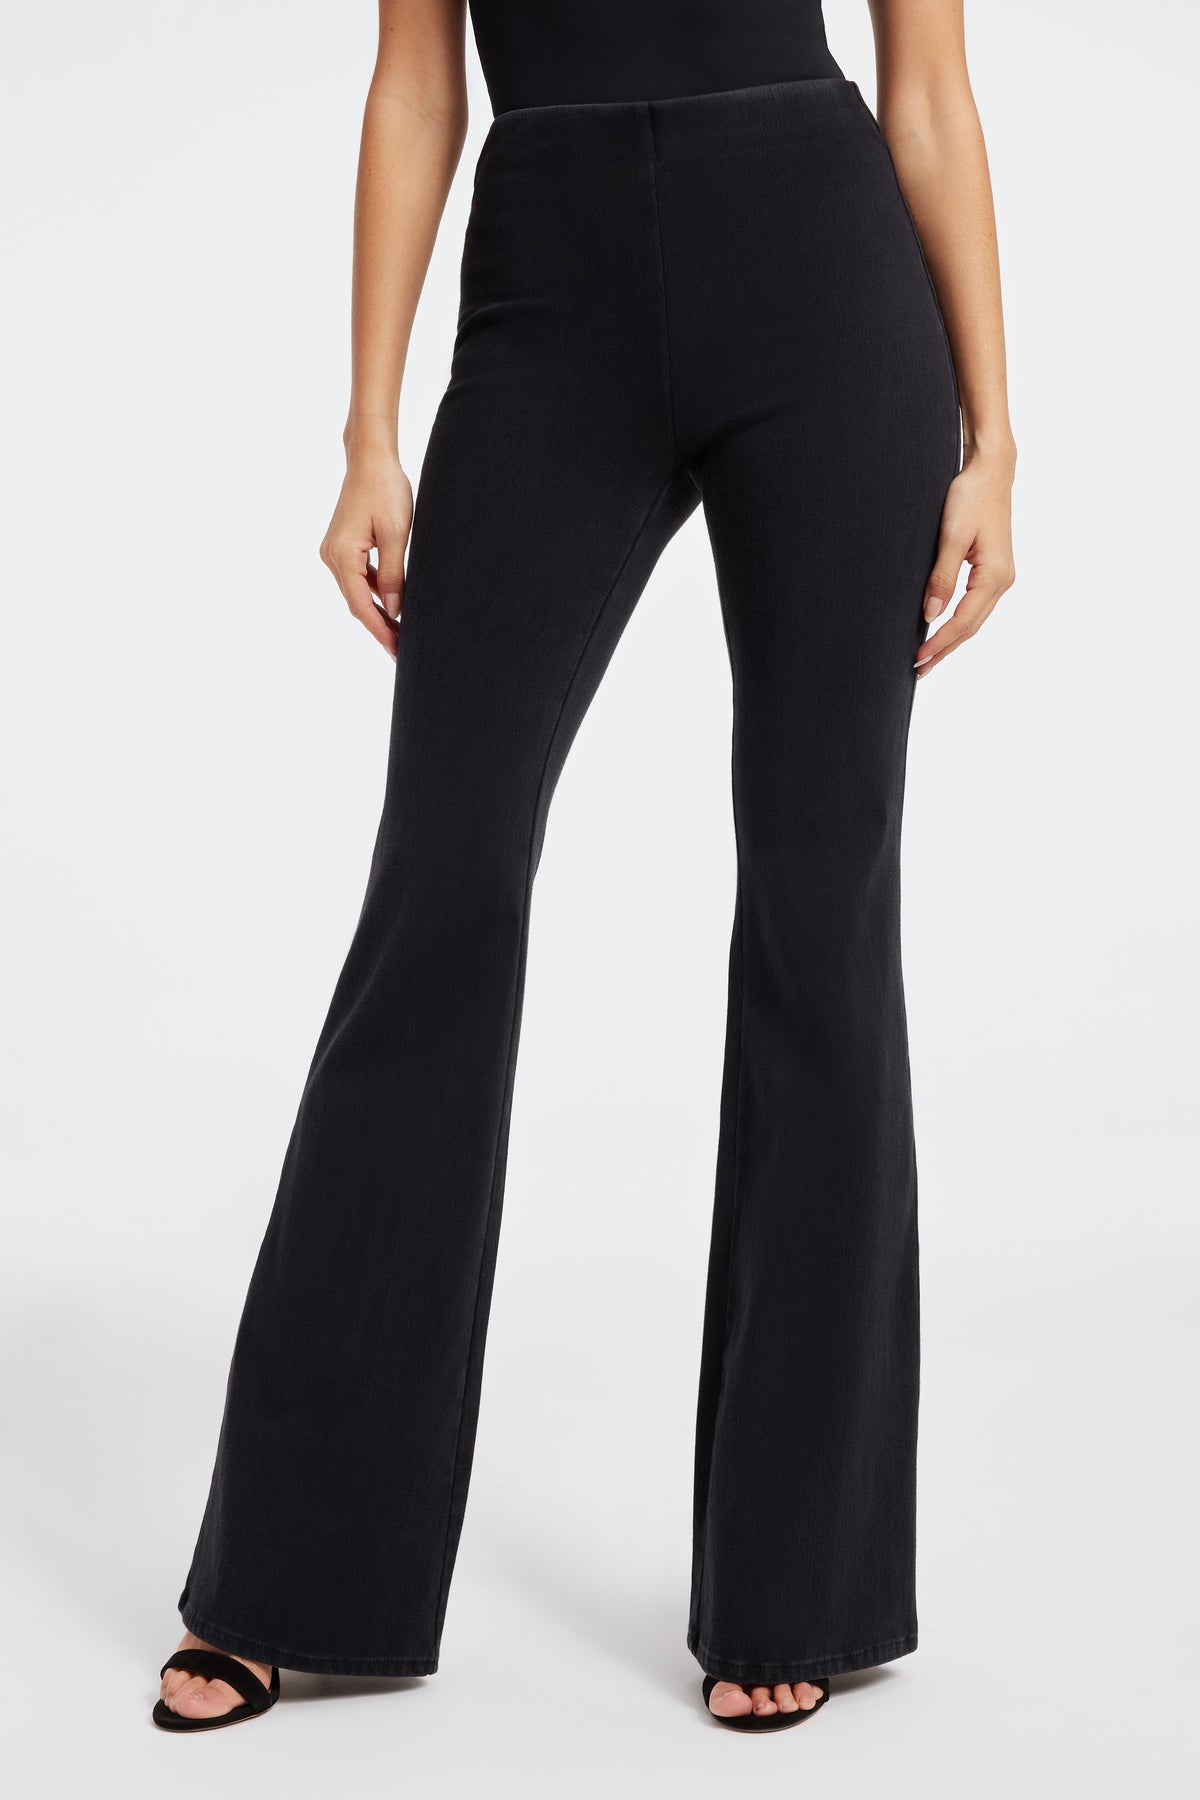 SOFT SCULPT PULL-ON JEANS | BLACK378 - AMERICAN